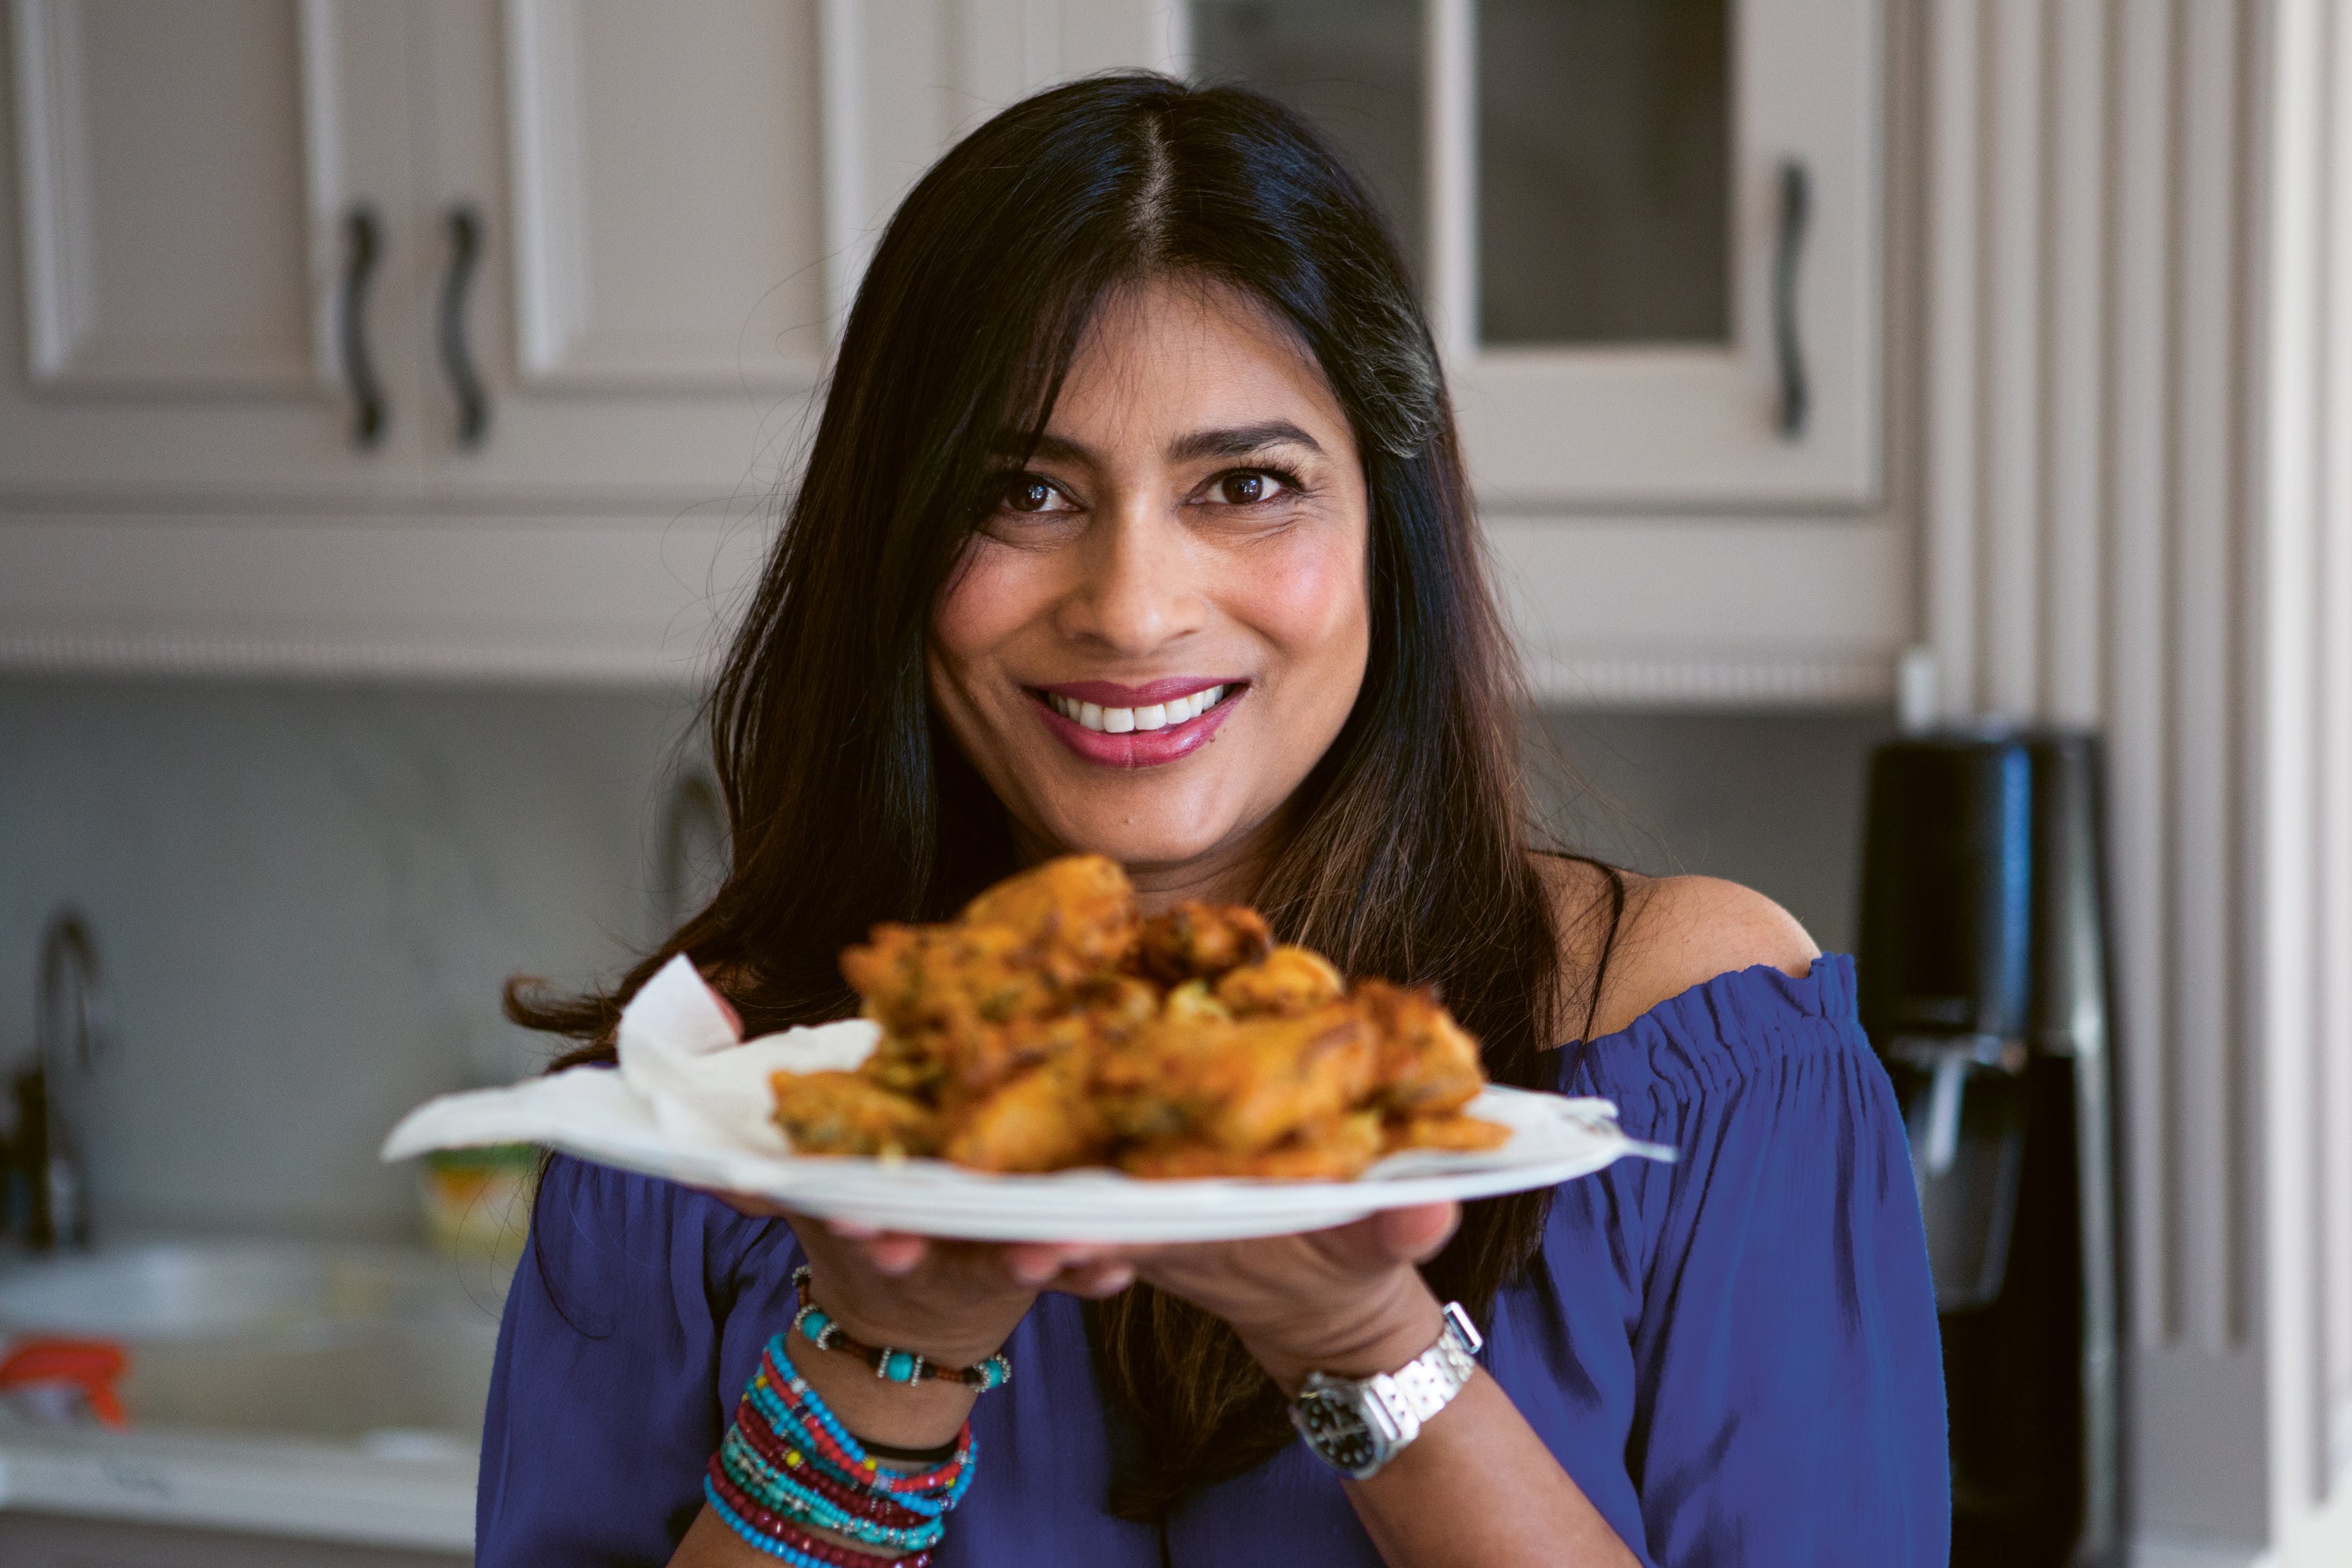 Katona feels a responsibility to share her inherited Bengali, and wider Indian food knowledge